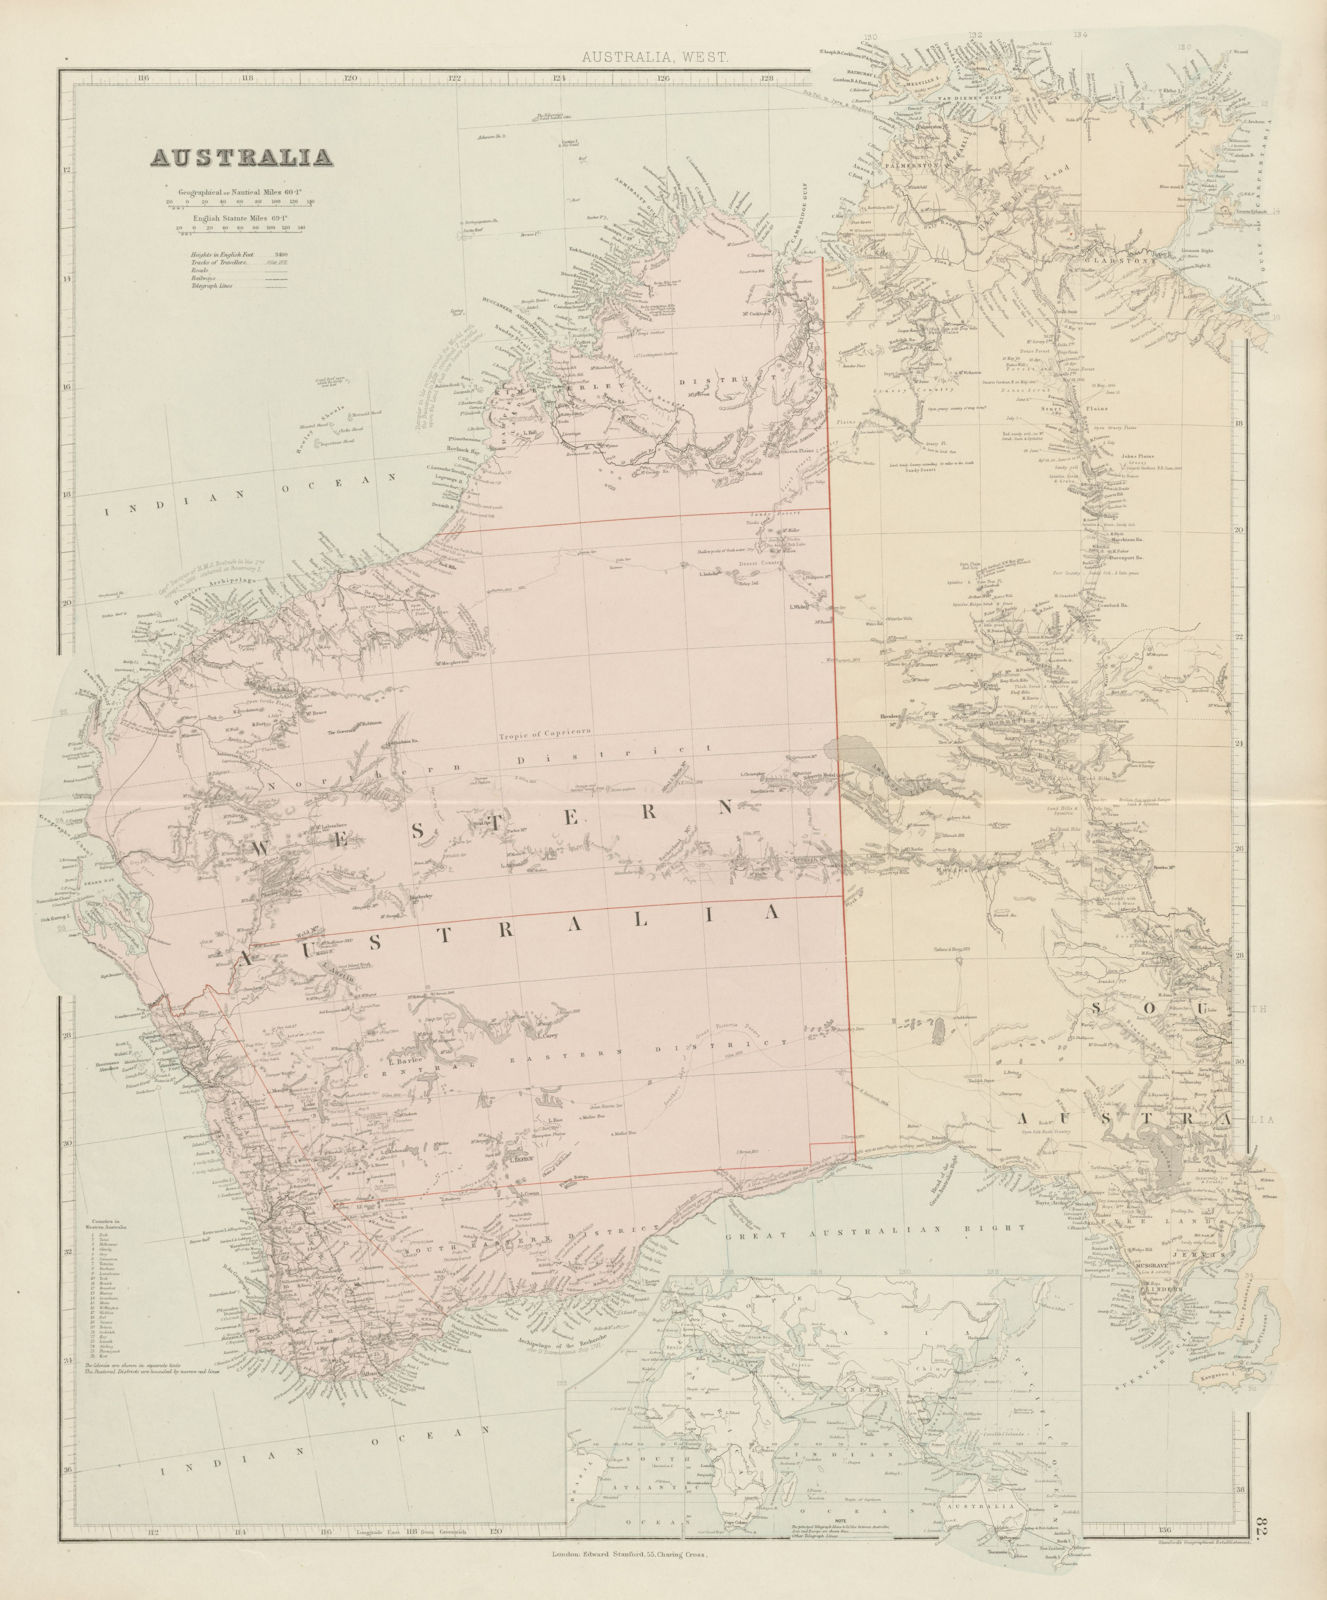 Associate Product Western Australia. Districts. Explorers' routes. Large 66x55cm STANFORD 1887 map